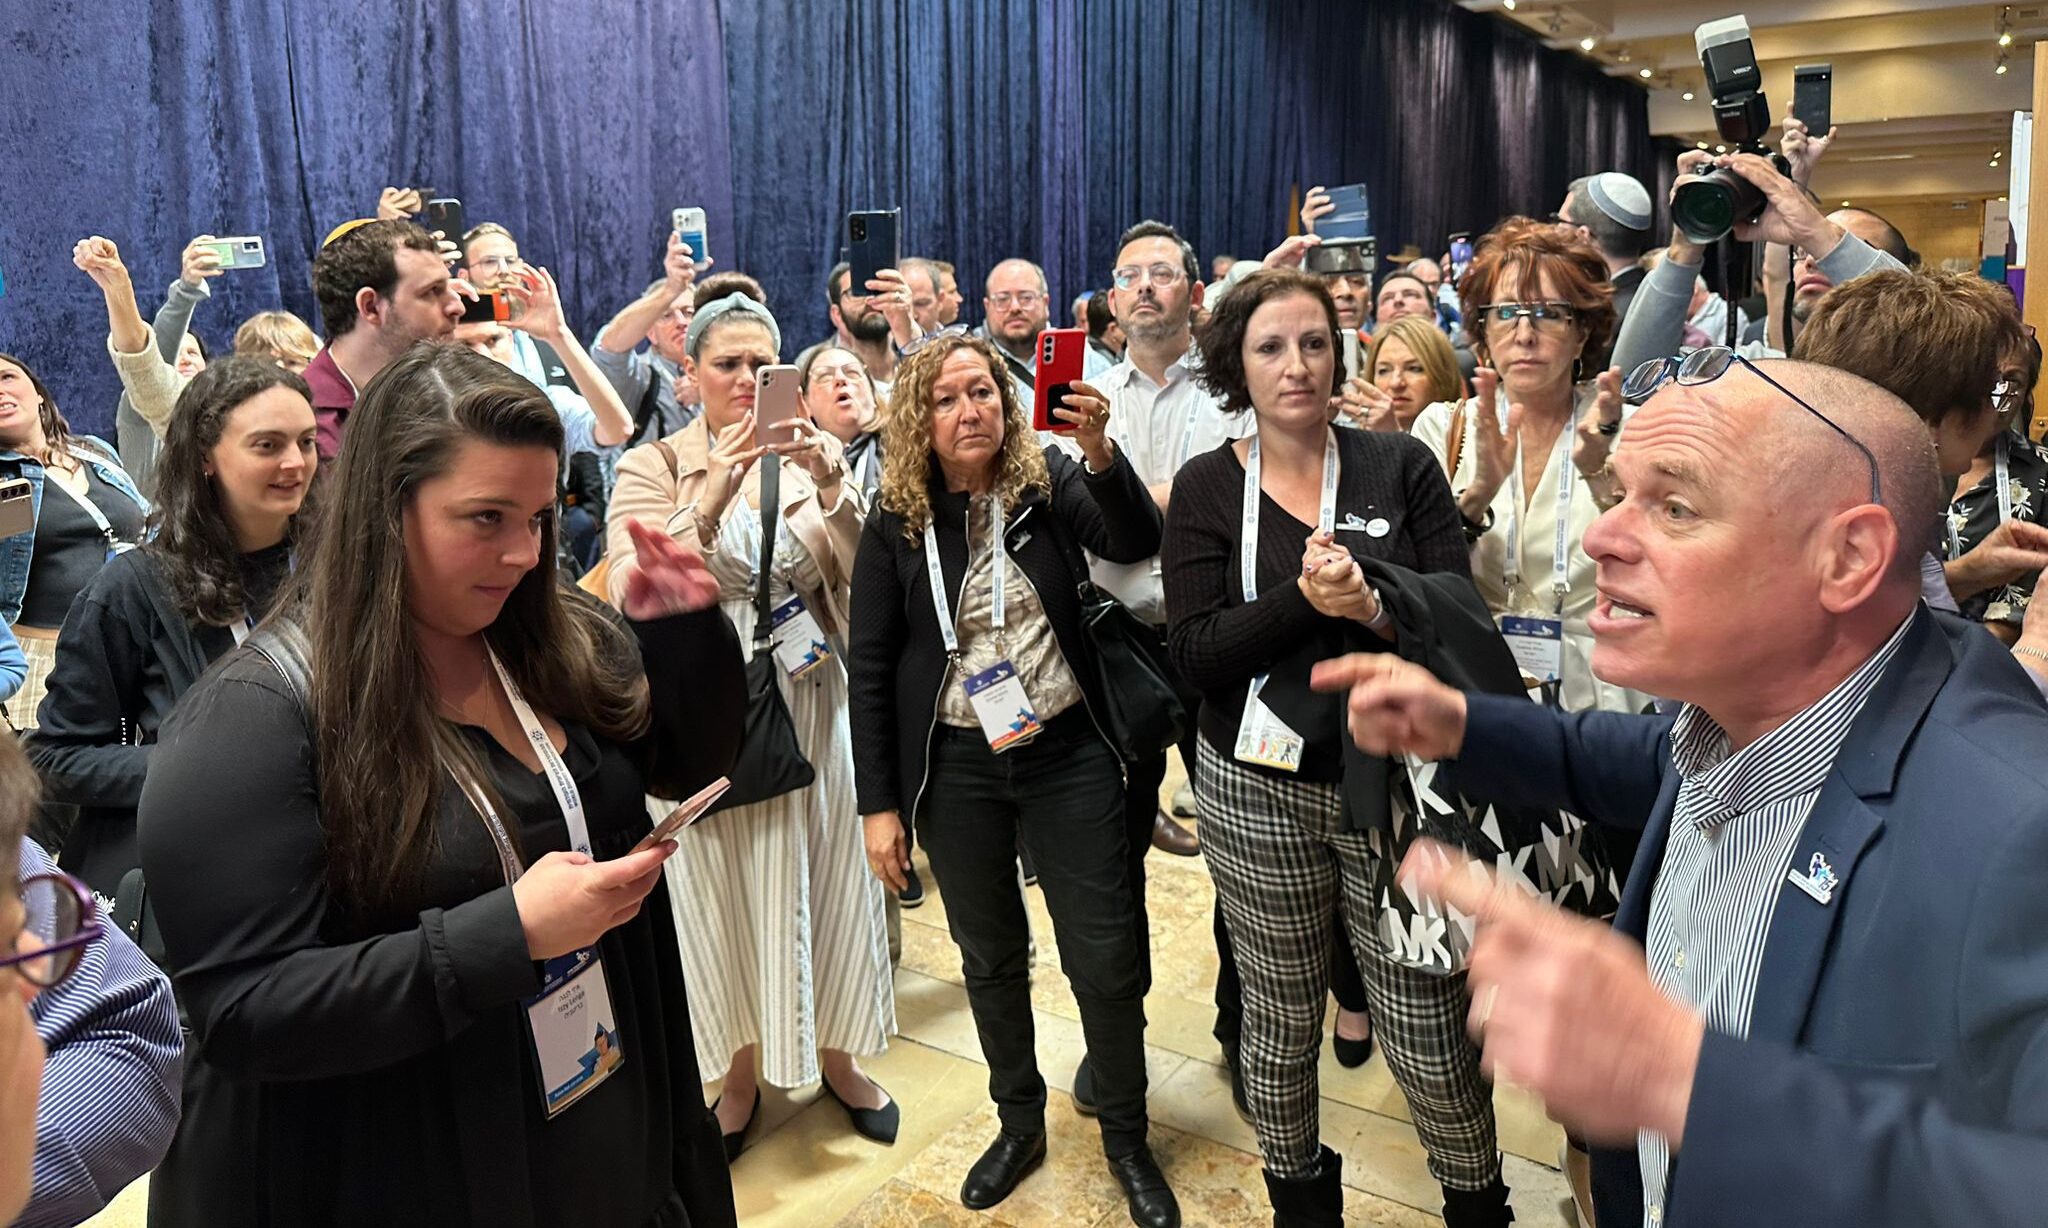 World Zionist Organization Vice Chairman Yizhar Hess speaks to protestors assembled outside the room where right-wing Knesset member Simcha Rothman was holding a meeting, April 21, 2023. (Courtesy)